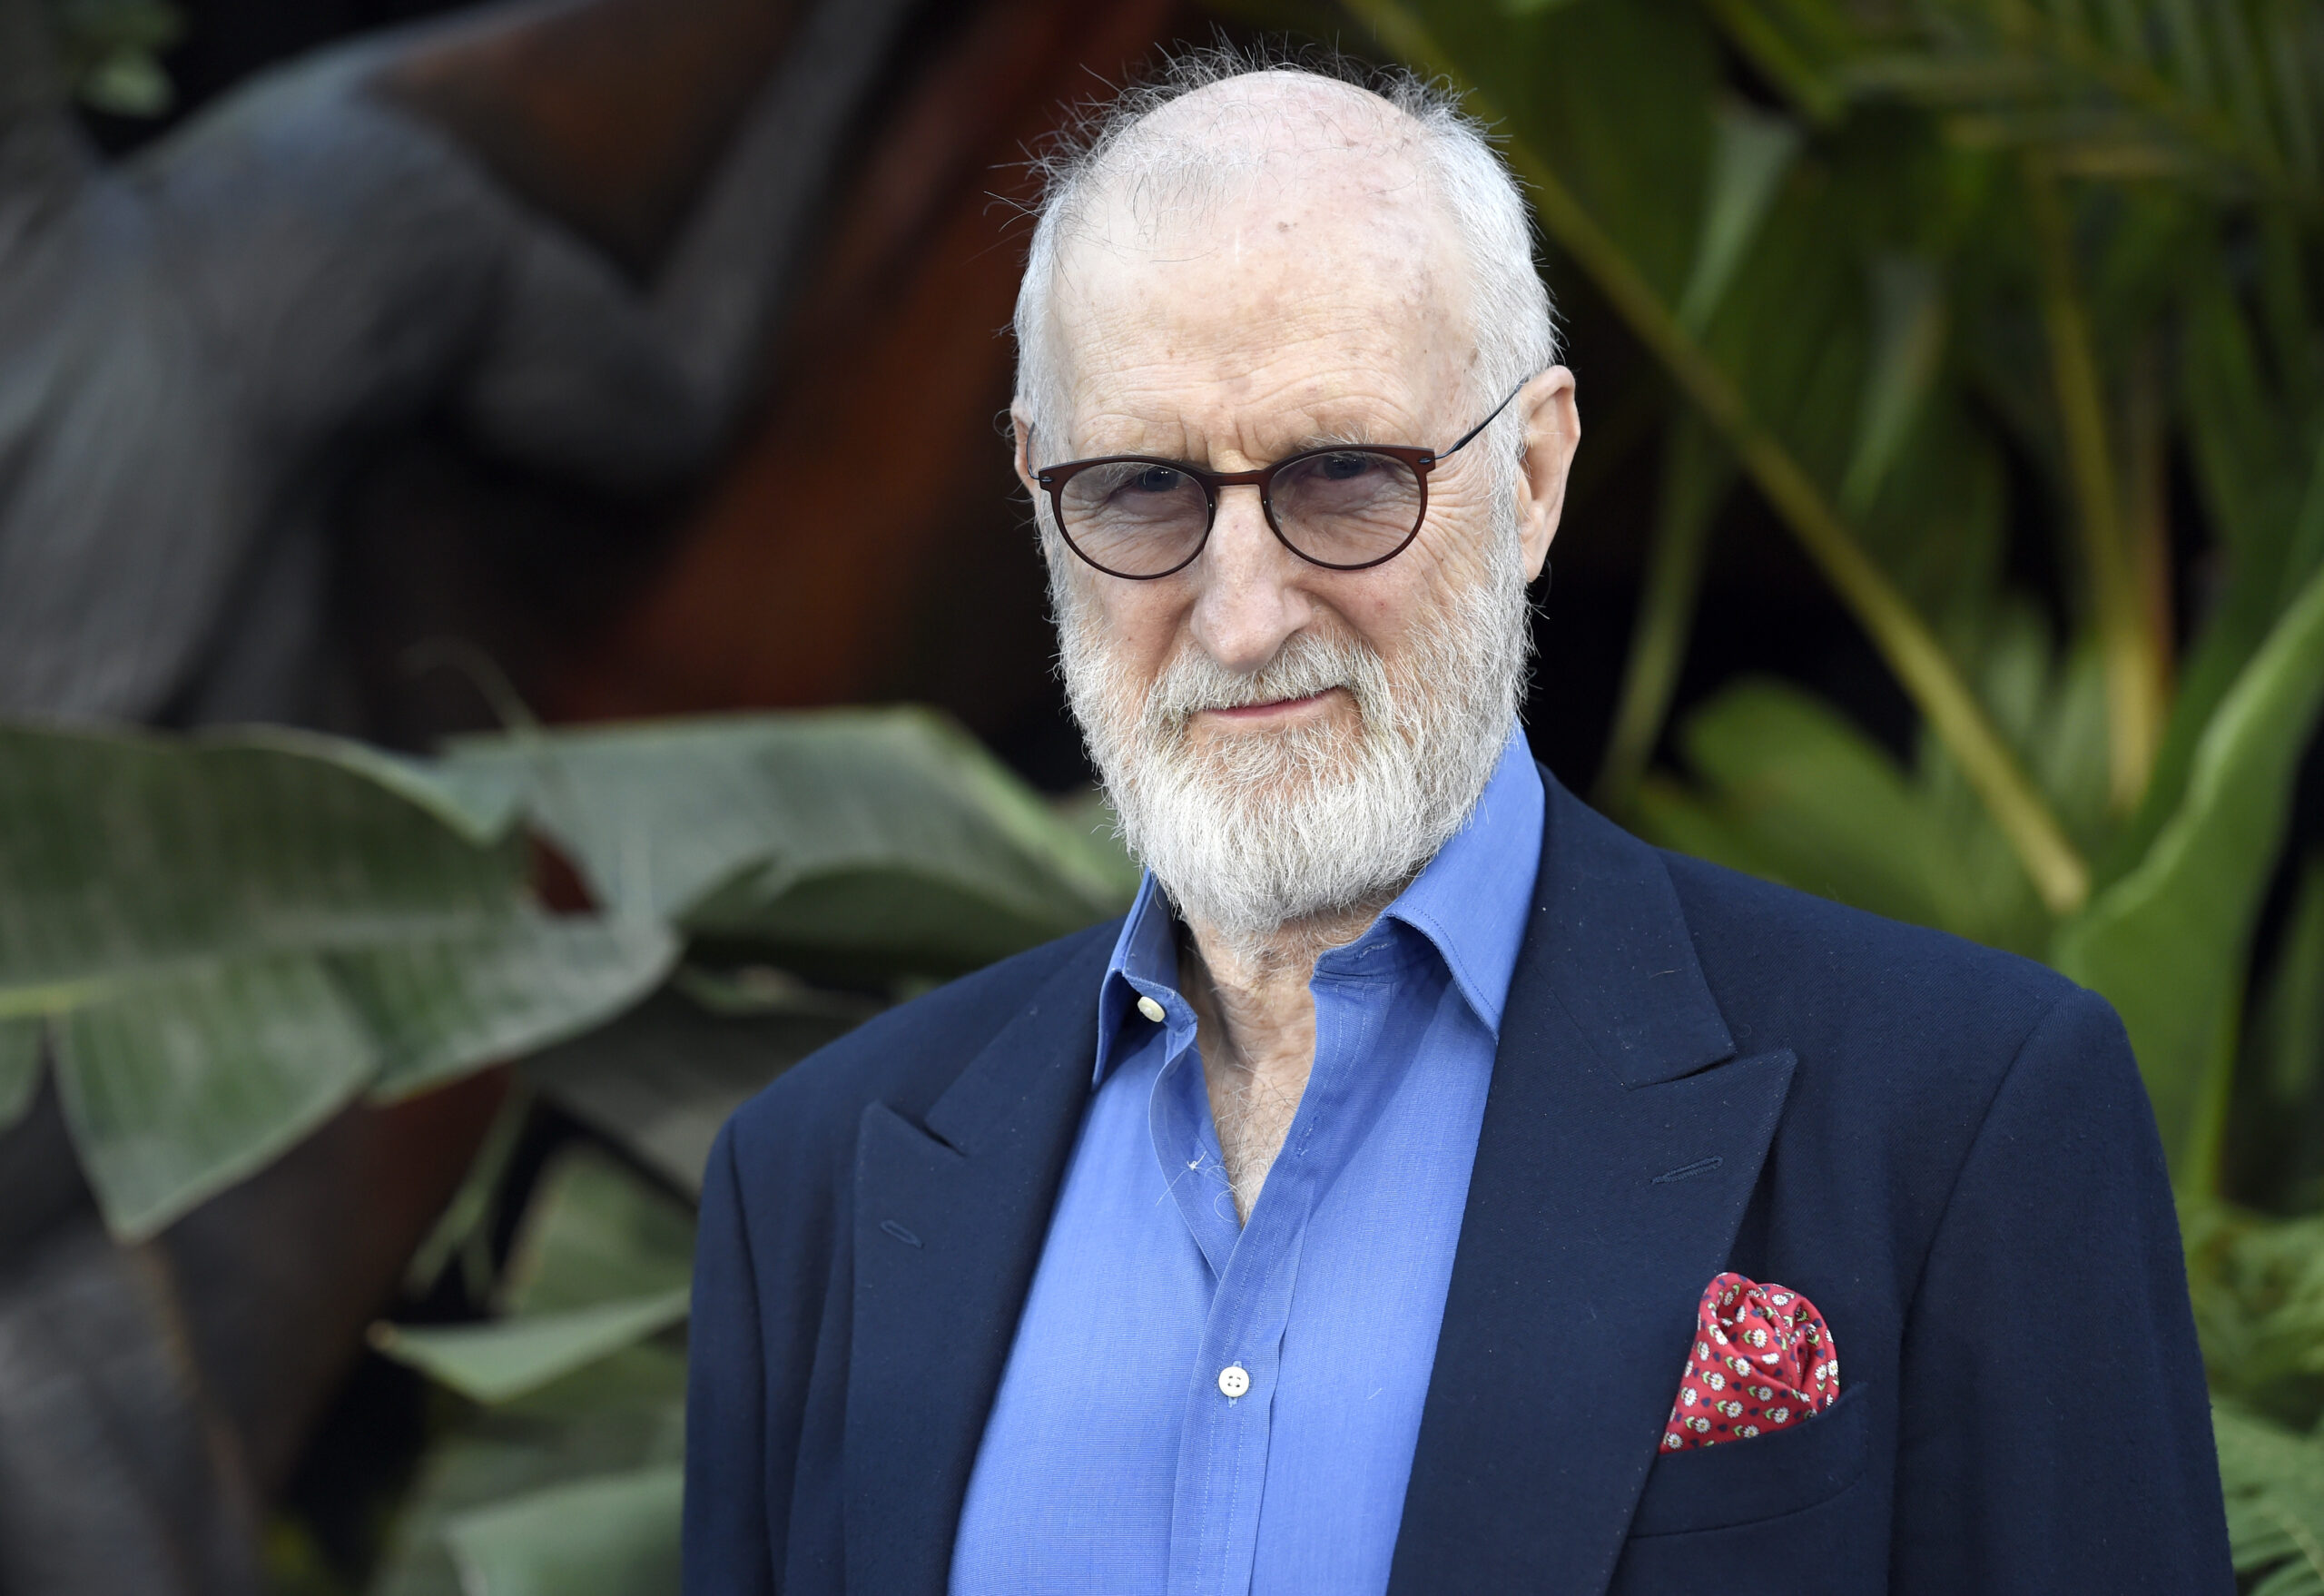 FILE - Actor James Cromwell arrives at the Los Angeles premiere of "Jurassic World: Fallen Kingdom" at the Walt Disney Concert Hall, Tuesday, June 12, 2018. Cromwell glued his hand to a midtown Manhattan Starbucks counter to protest the coffee chain’s extra charge for plant-based milk, Tuesday, May 10, 2022, in New York. (Photo by Chris Pizzello/Invision/AP, File)